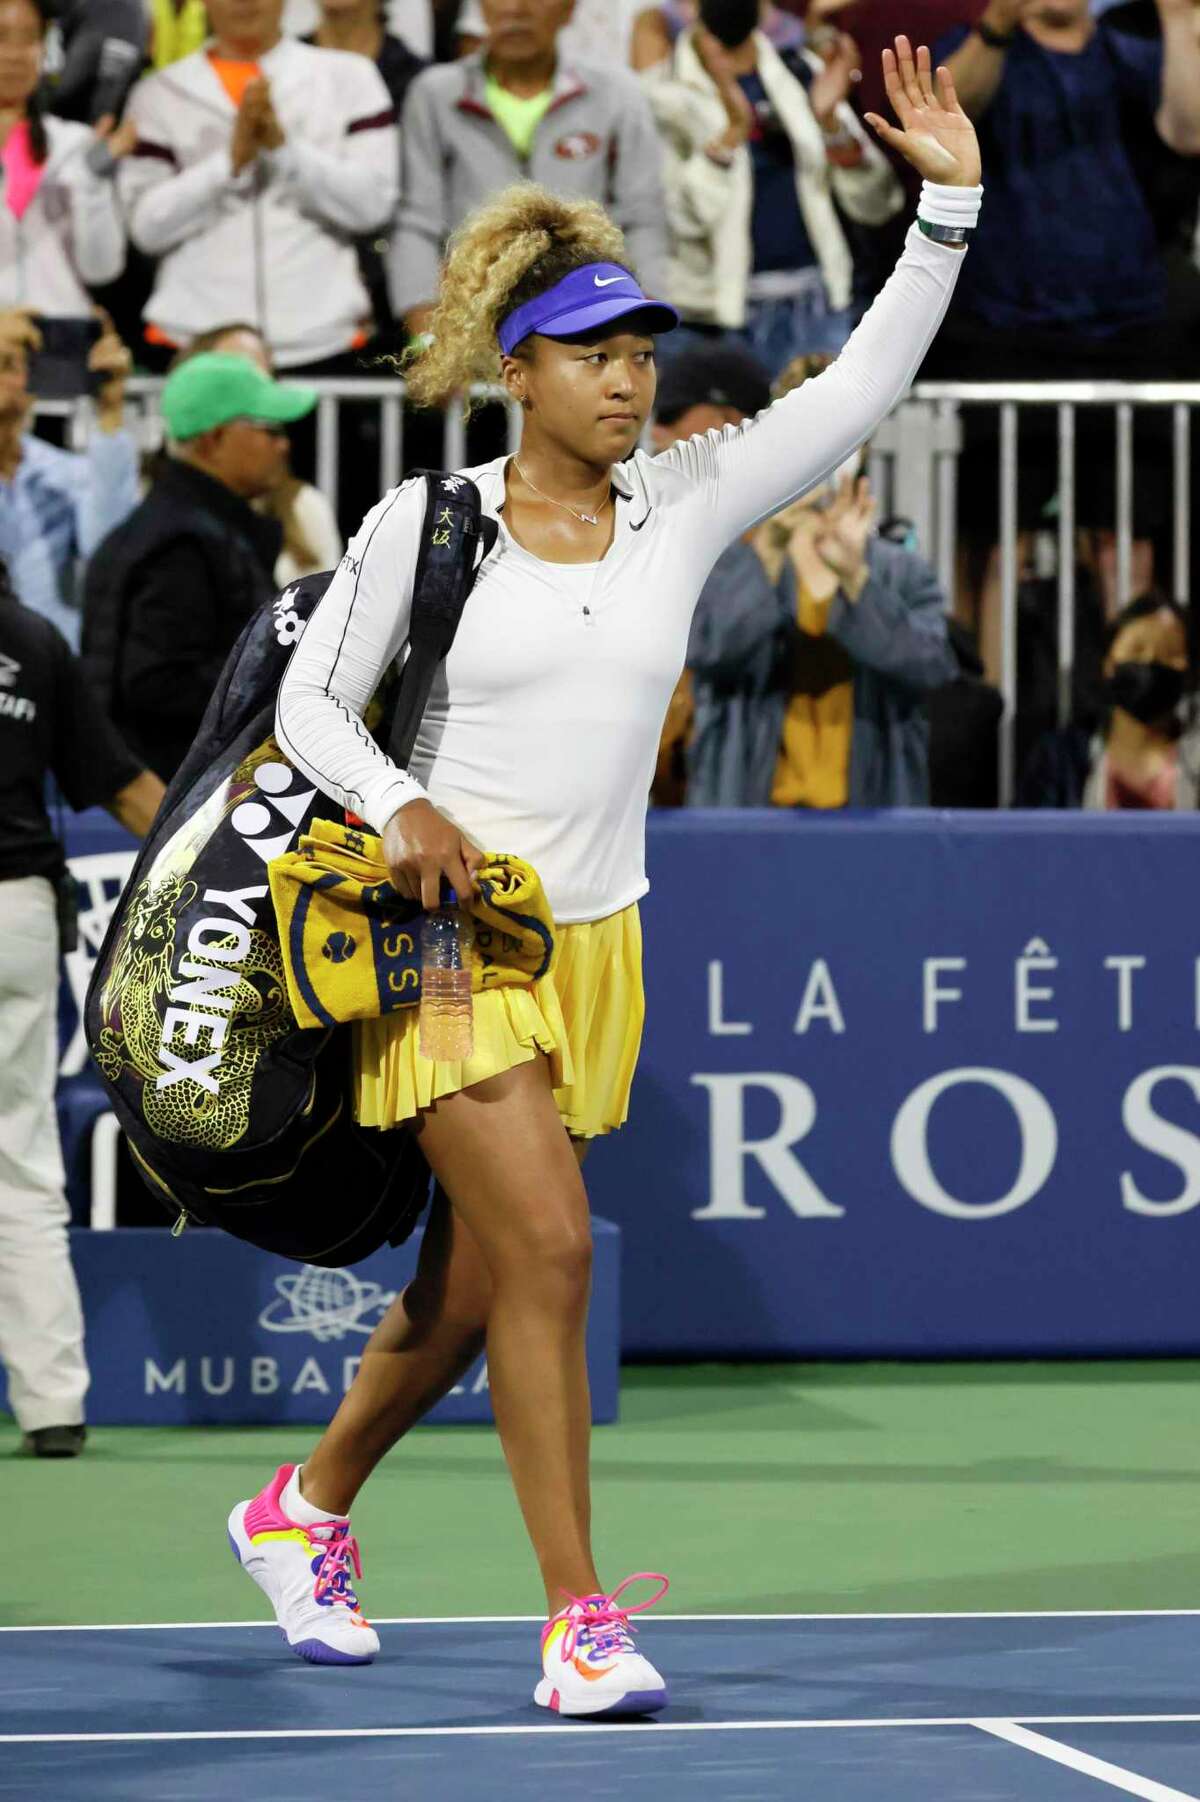 Naomi Osaka (Japan) exits following her match against Coco Gauff (USA) at the Mubadala Silicon Valley Classic, Thursday, Aug. 4, 2022, in San Jose, Calif. Gauff won 6-4, 6-4, and advances to the next round in the tennis tournament.